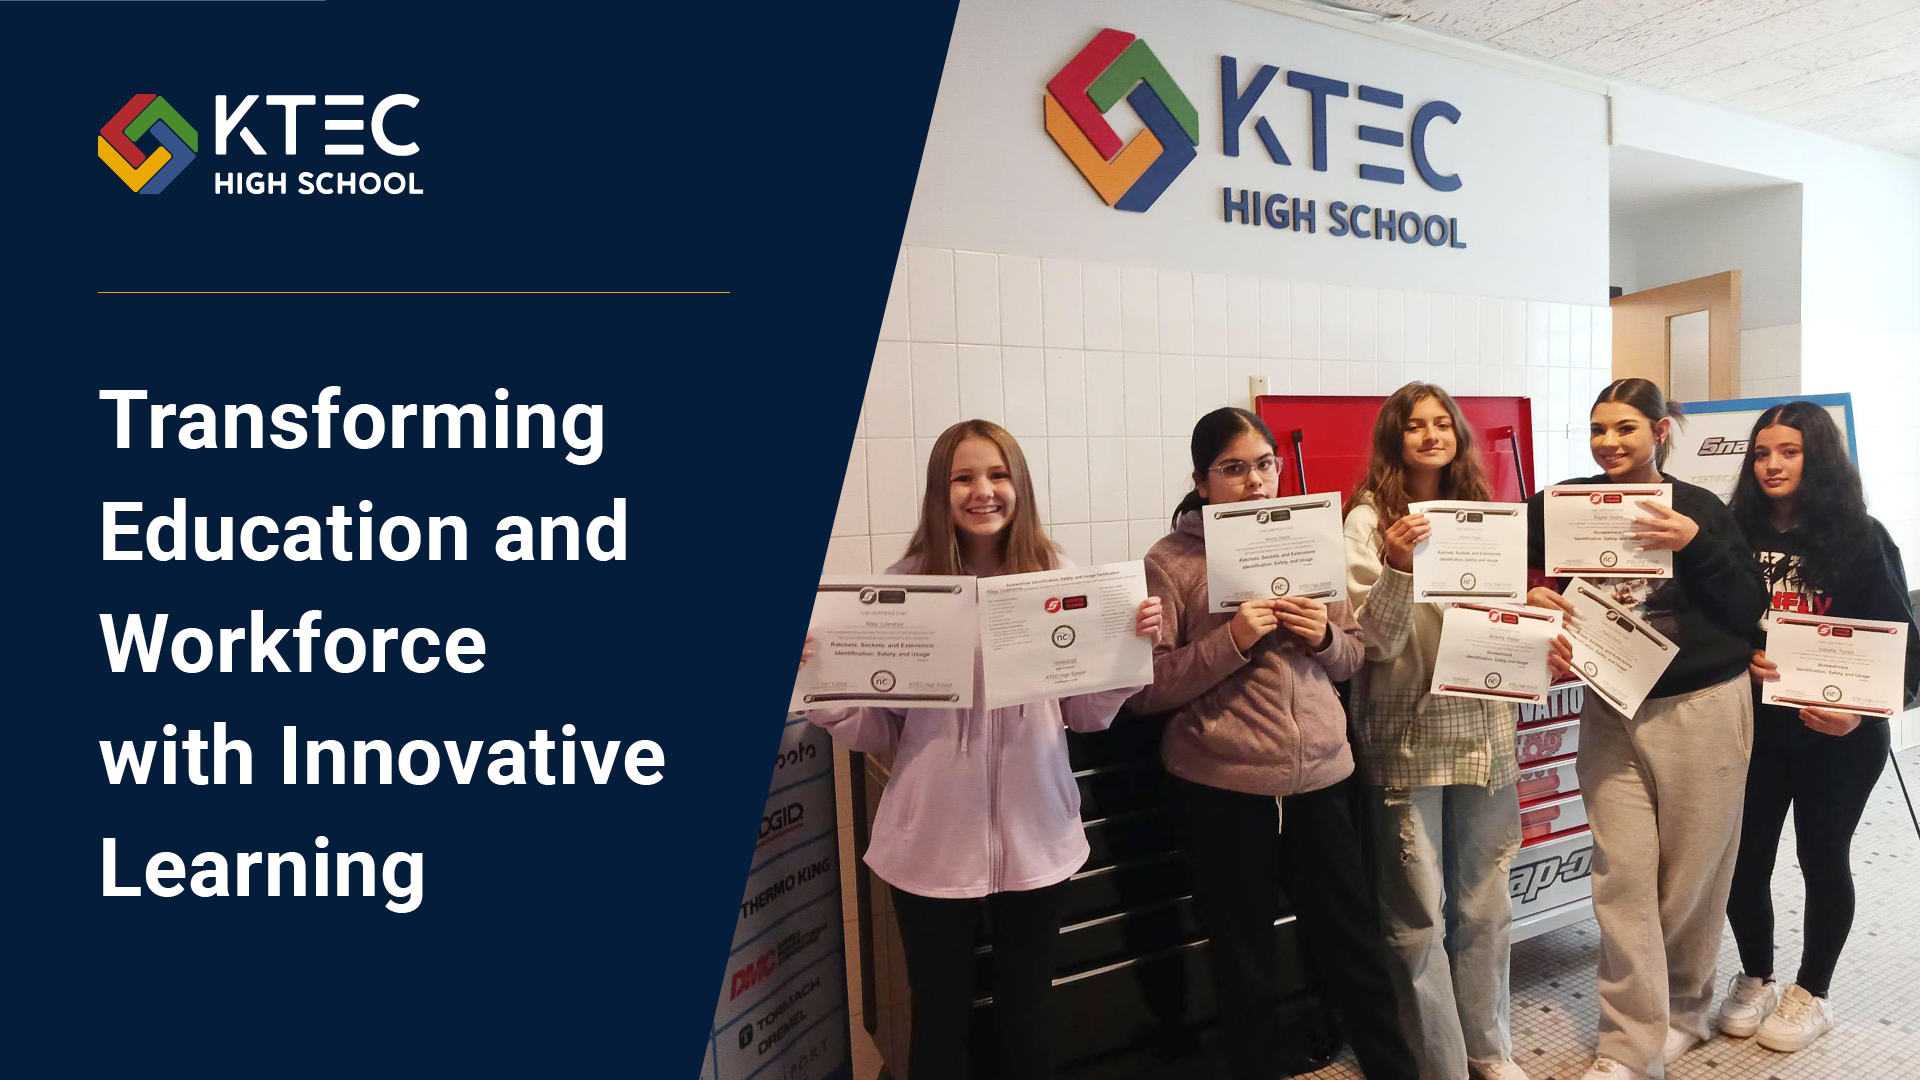 KTEC High School: Transforming Education and Workforce with Innovative Learning